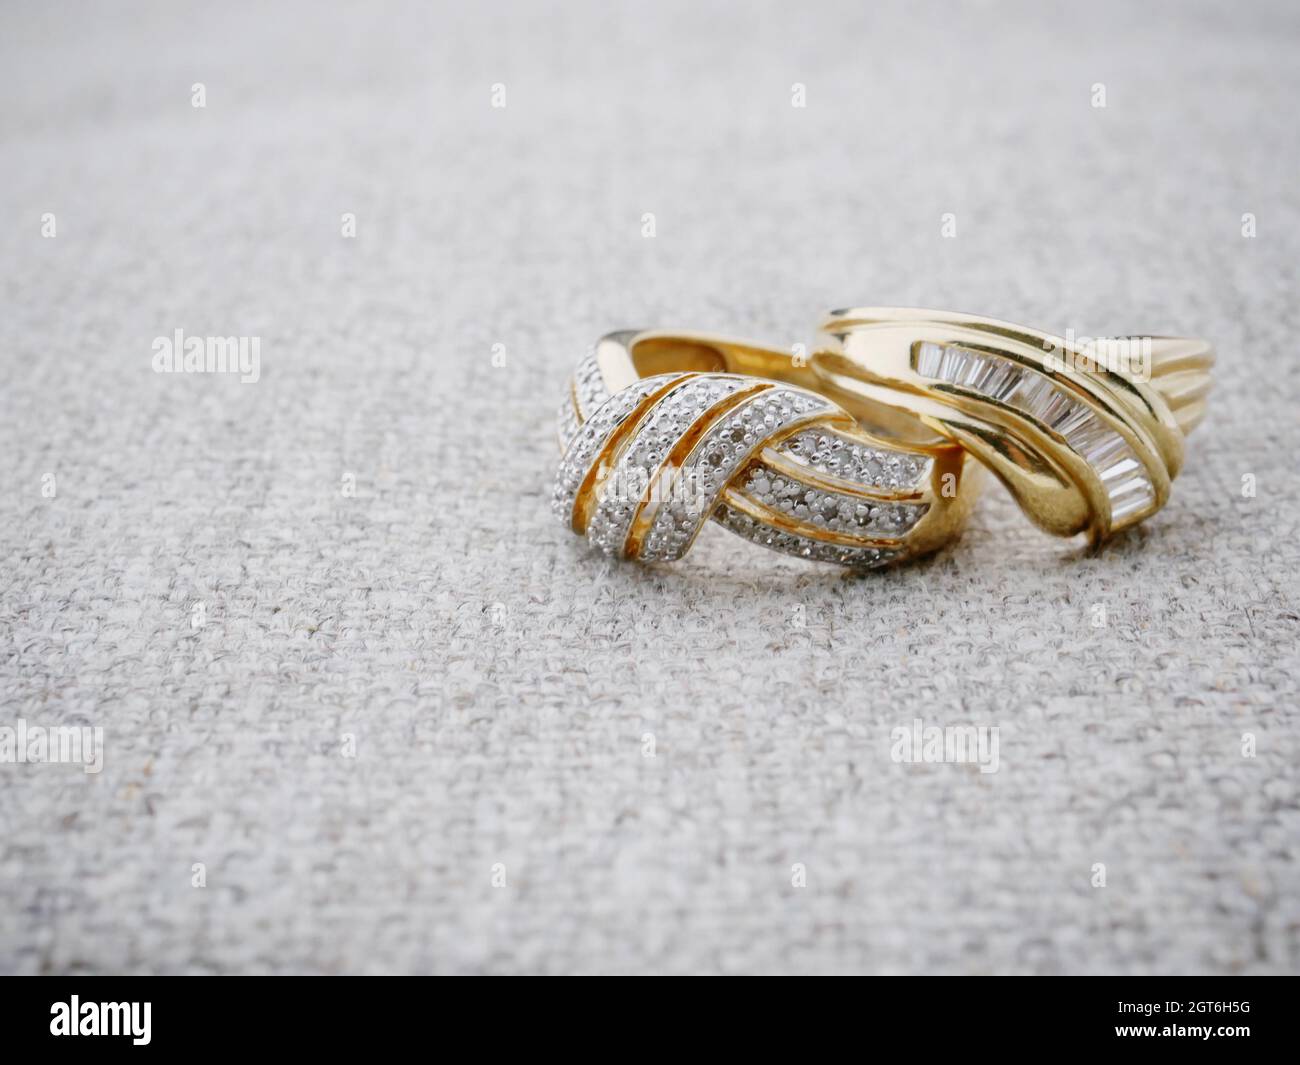 High Angle View Of Wedding Rings On Table Stock Photo